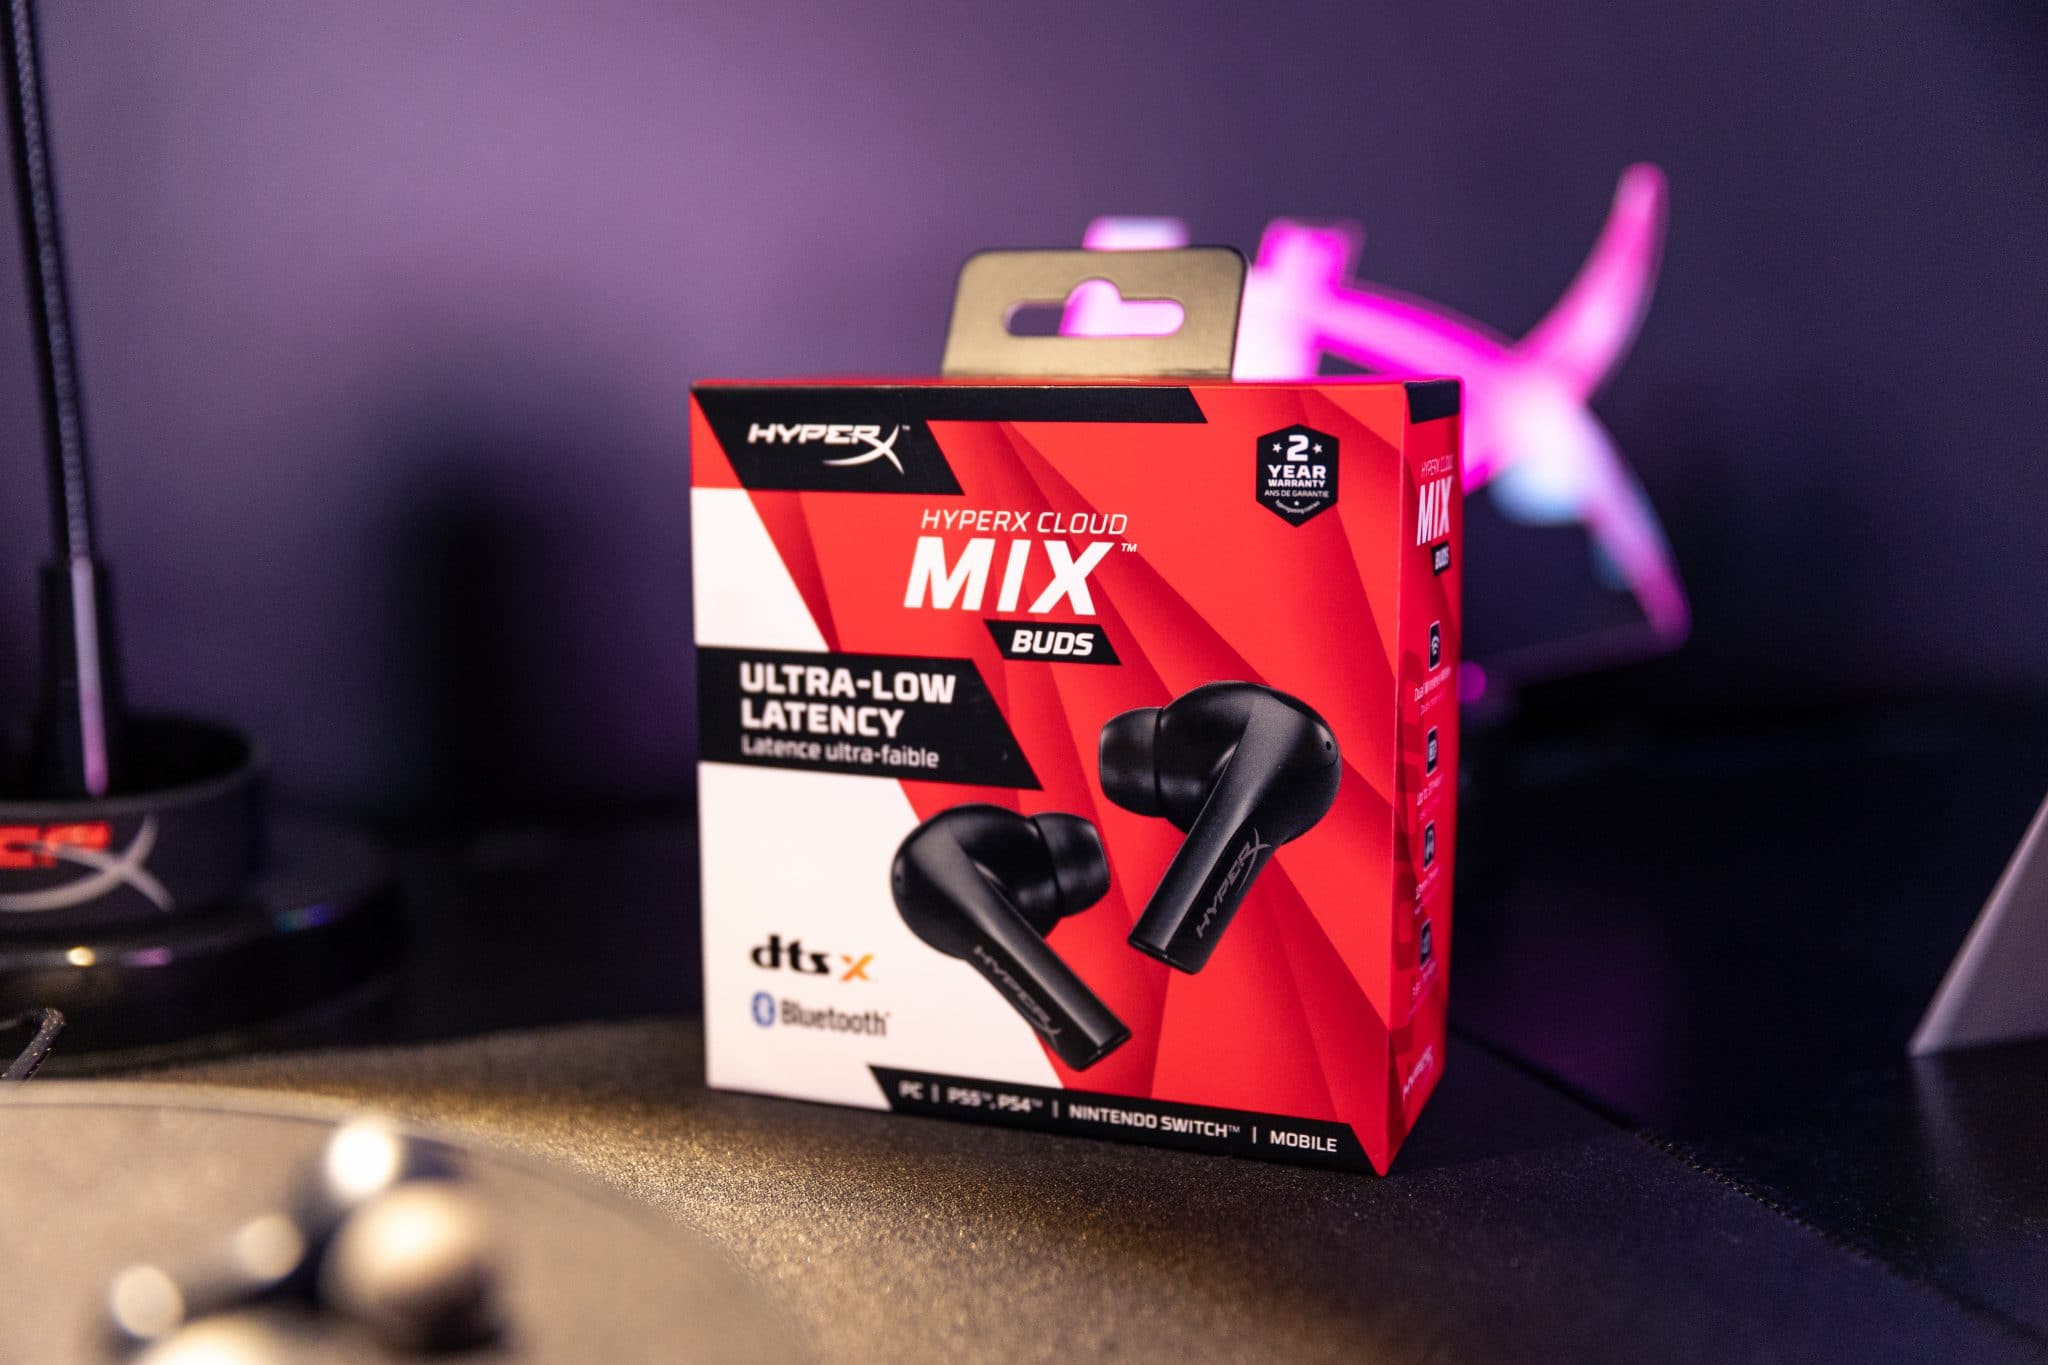 - Buds Of Dual-Connection Noisy World Options Wireless, Announcement A Mix True HyperX - Pixel &